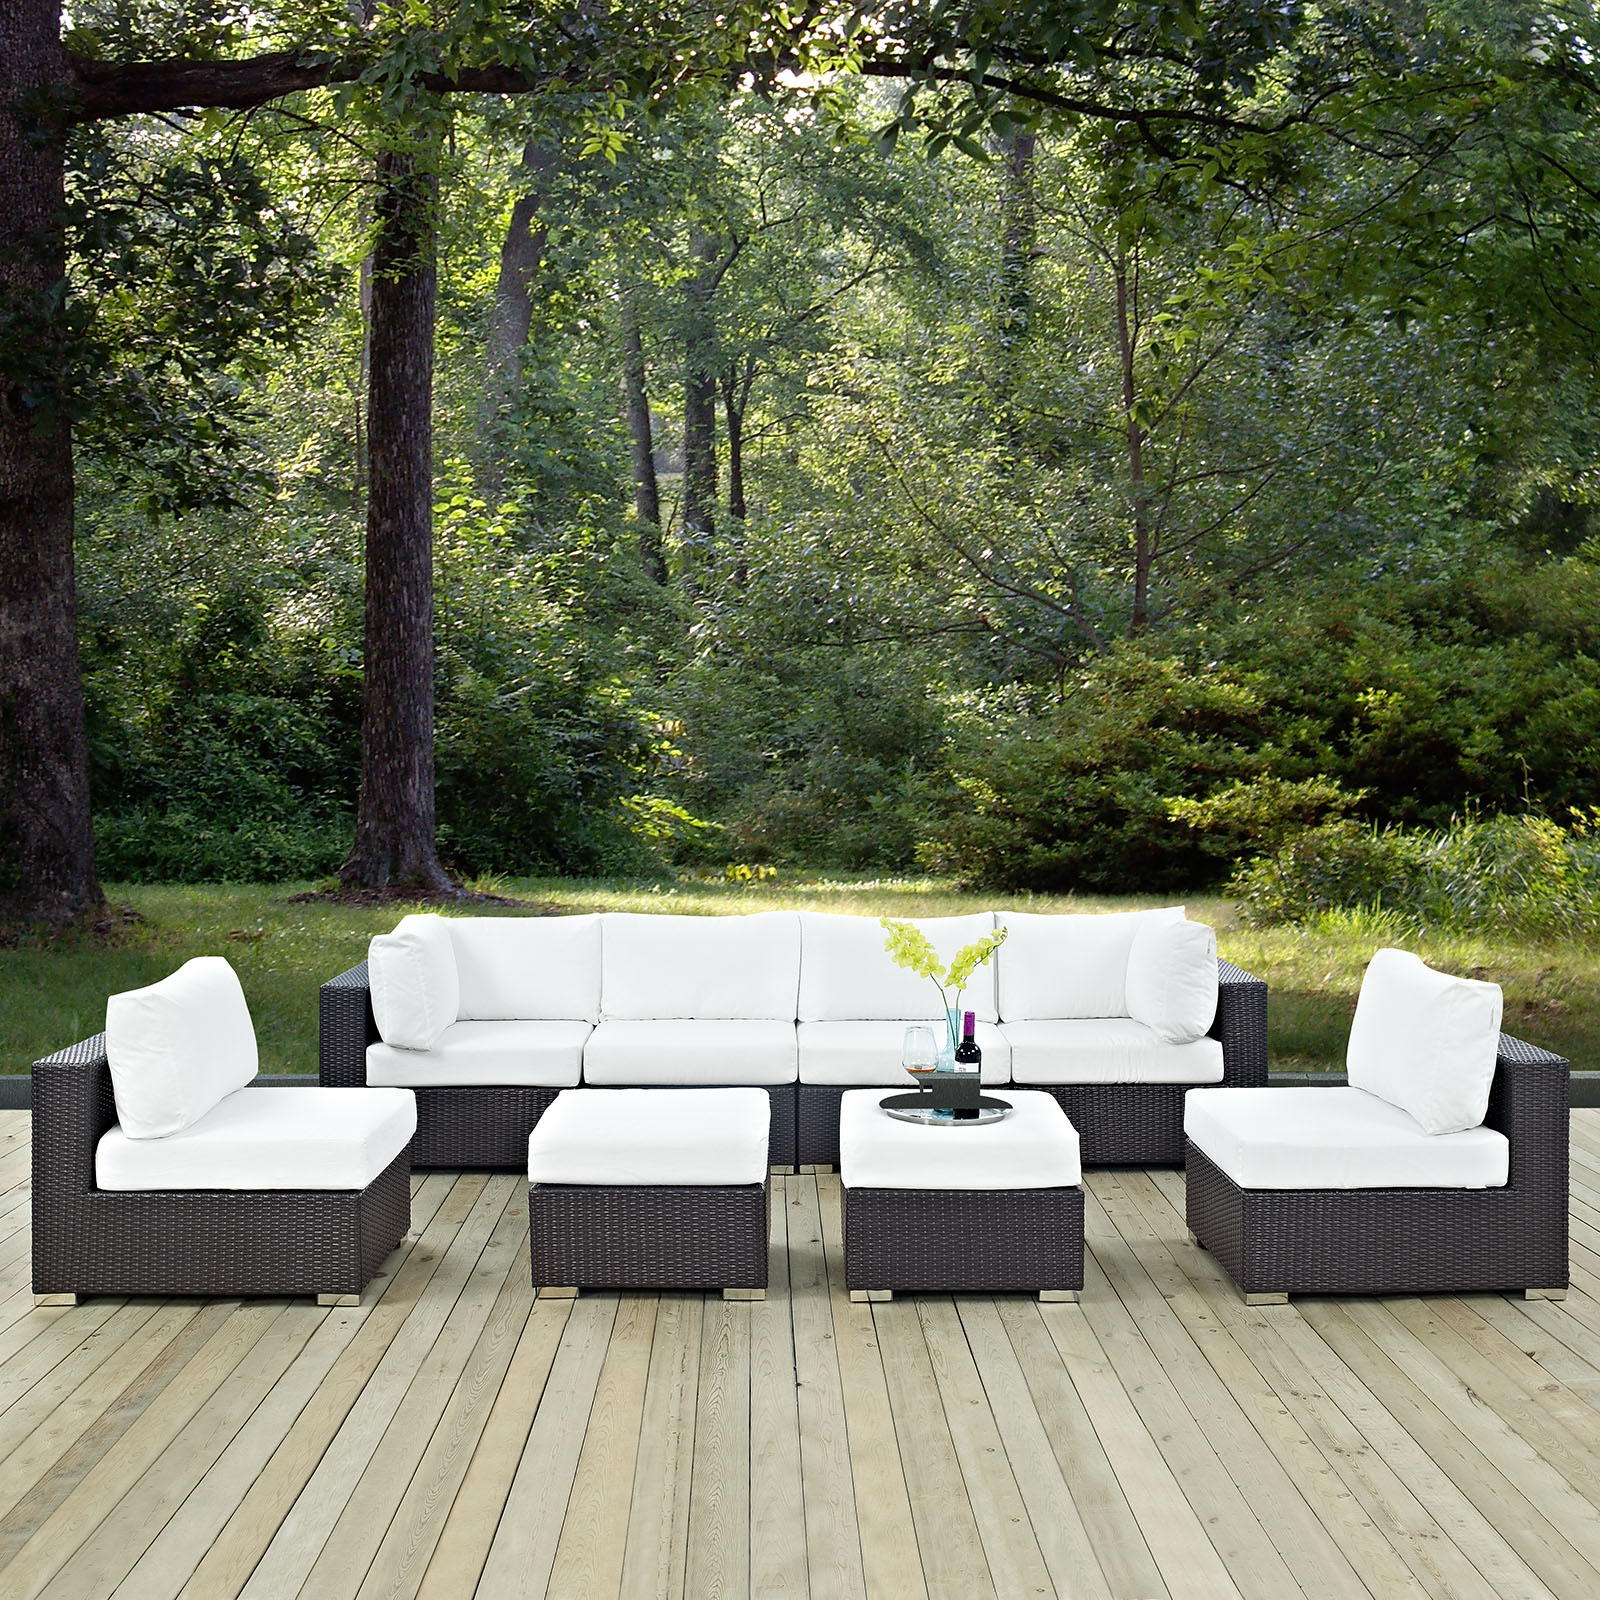 Modway Convene 8 Piece Outdoor Patio Sectional Set in Espresso White - image 1 of 7